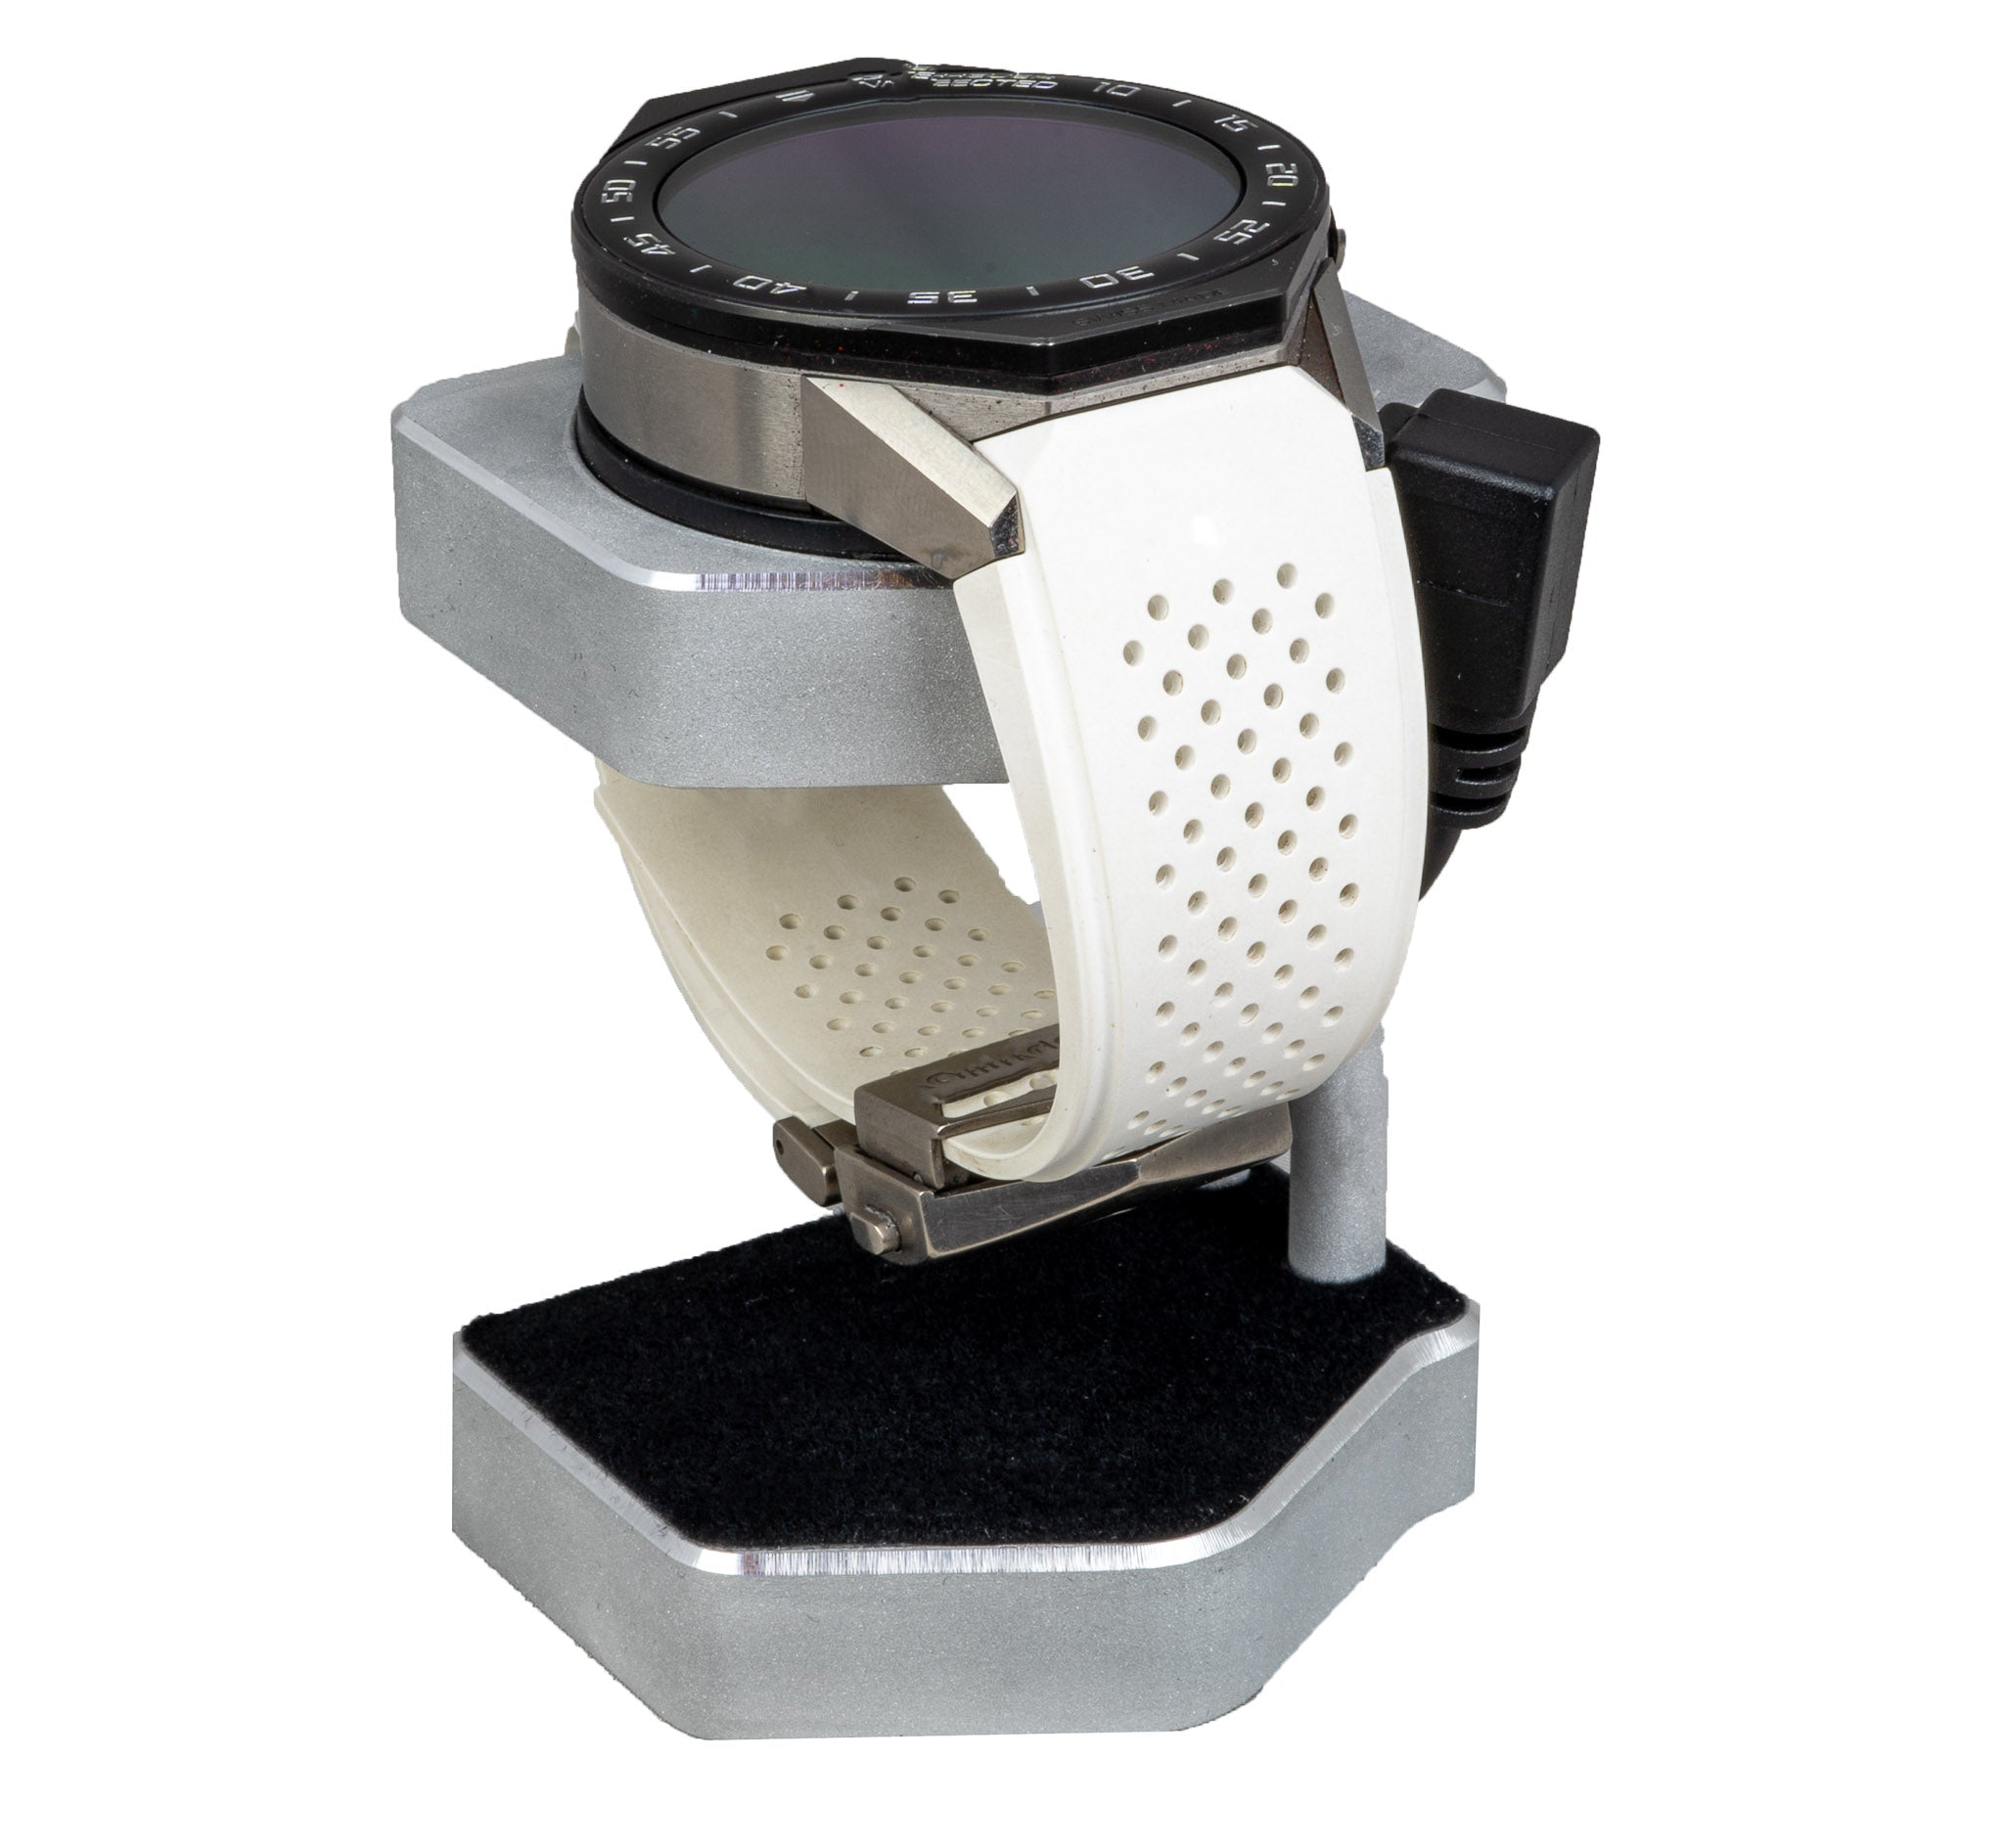 2nd Generation TAG Heuer Connected 45 Modular Aluminum Stand (Includes USB Cable) - Artifex Design 3D